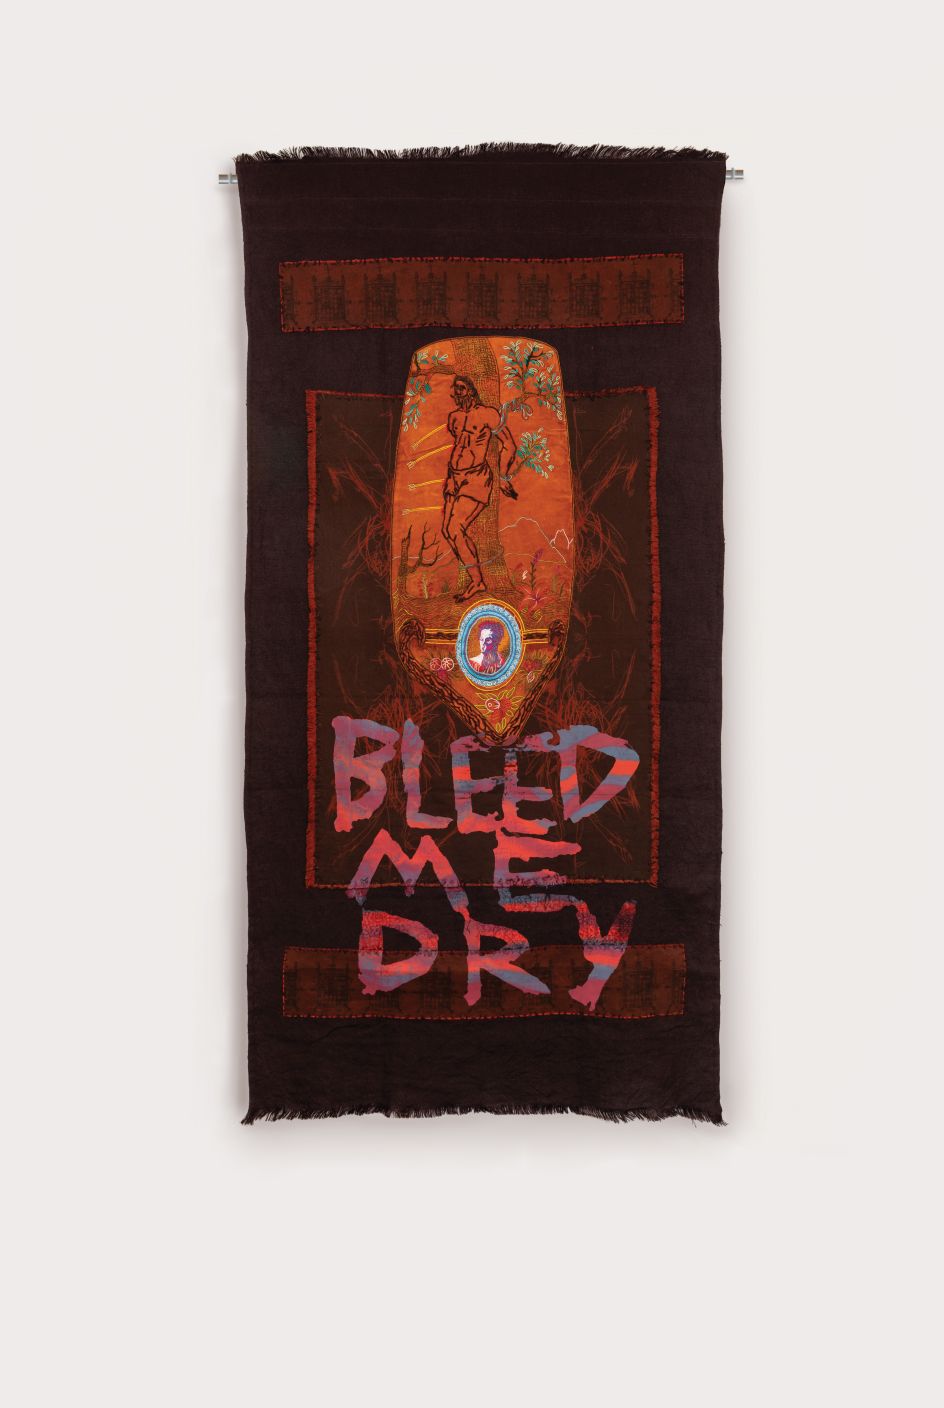 Henry Hussey, Bleed Me Dry , 2019. Screen print: digitally printed linen and canvas, dyed hessian and yarn, bleached velvet, embroidery, 260 x 130 cm. Courtesy of Anima Mundi